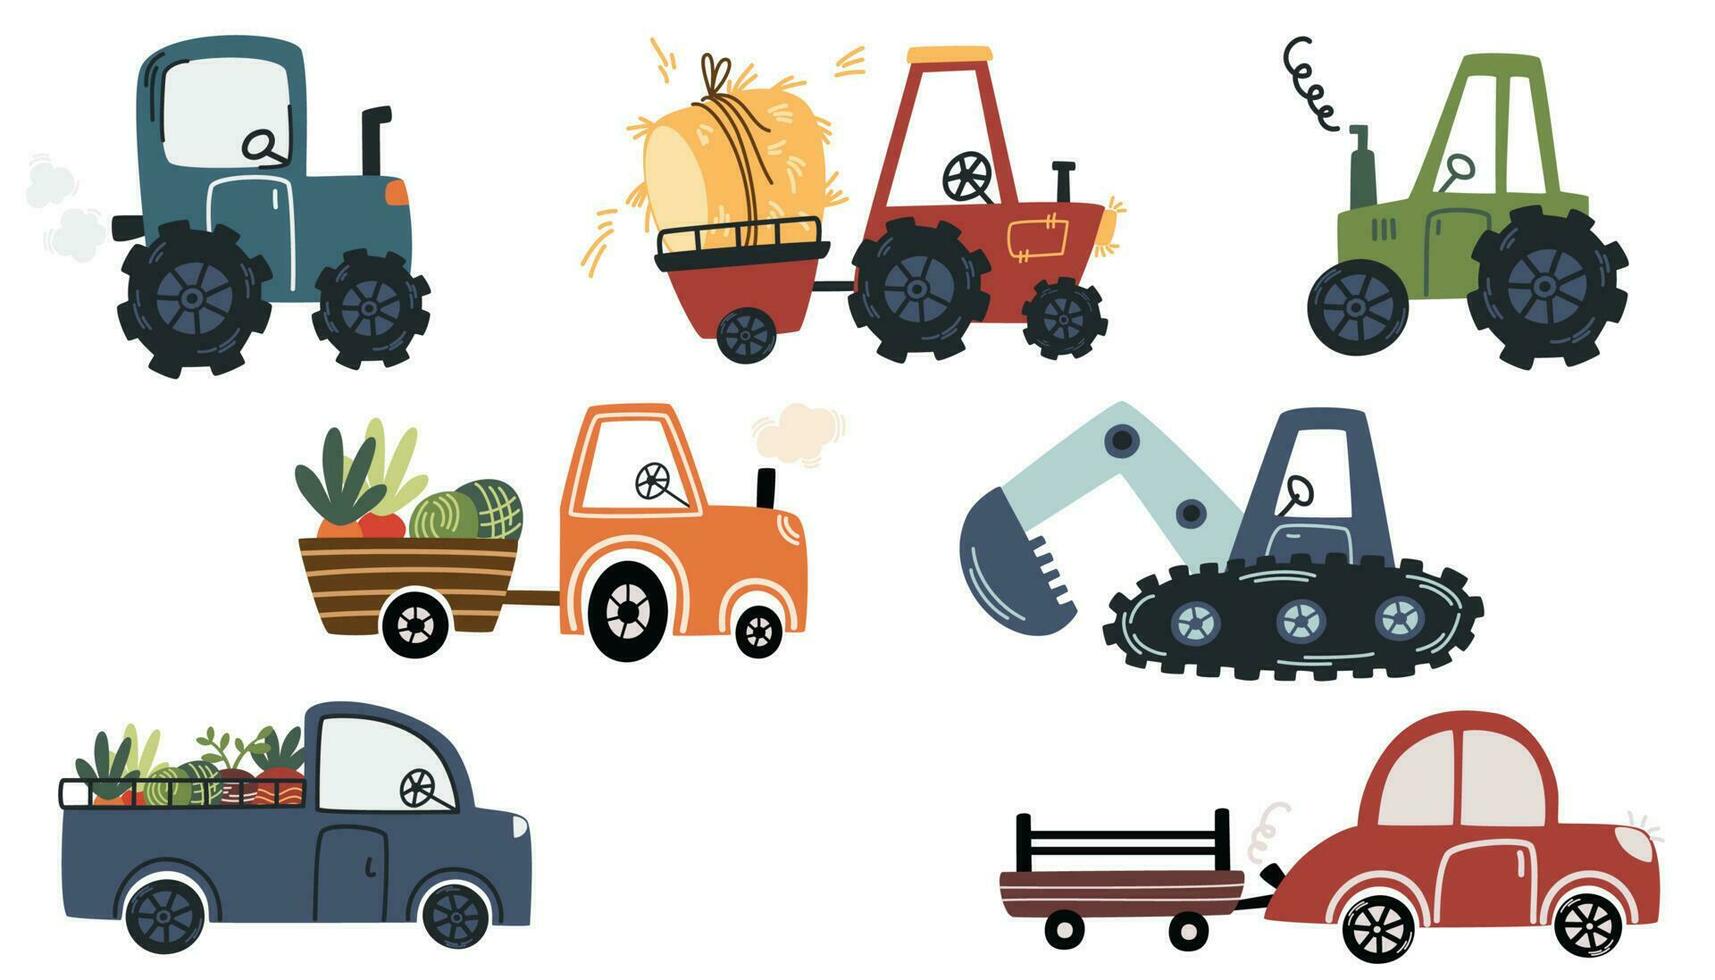 Agricultural tractors. Farm cars, industrial tractor, combine harvester, harvester, duster, sowing machine for transportation. Vehicle for field agricultural work. Cartoon vector illustration